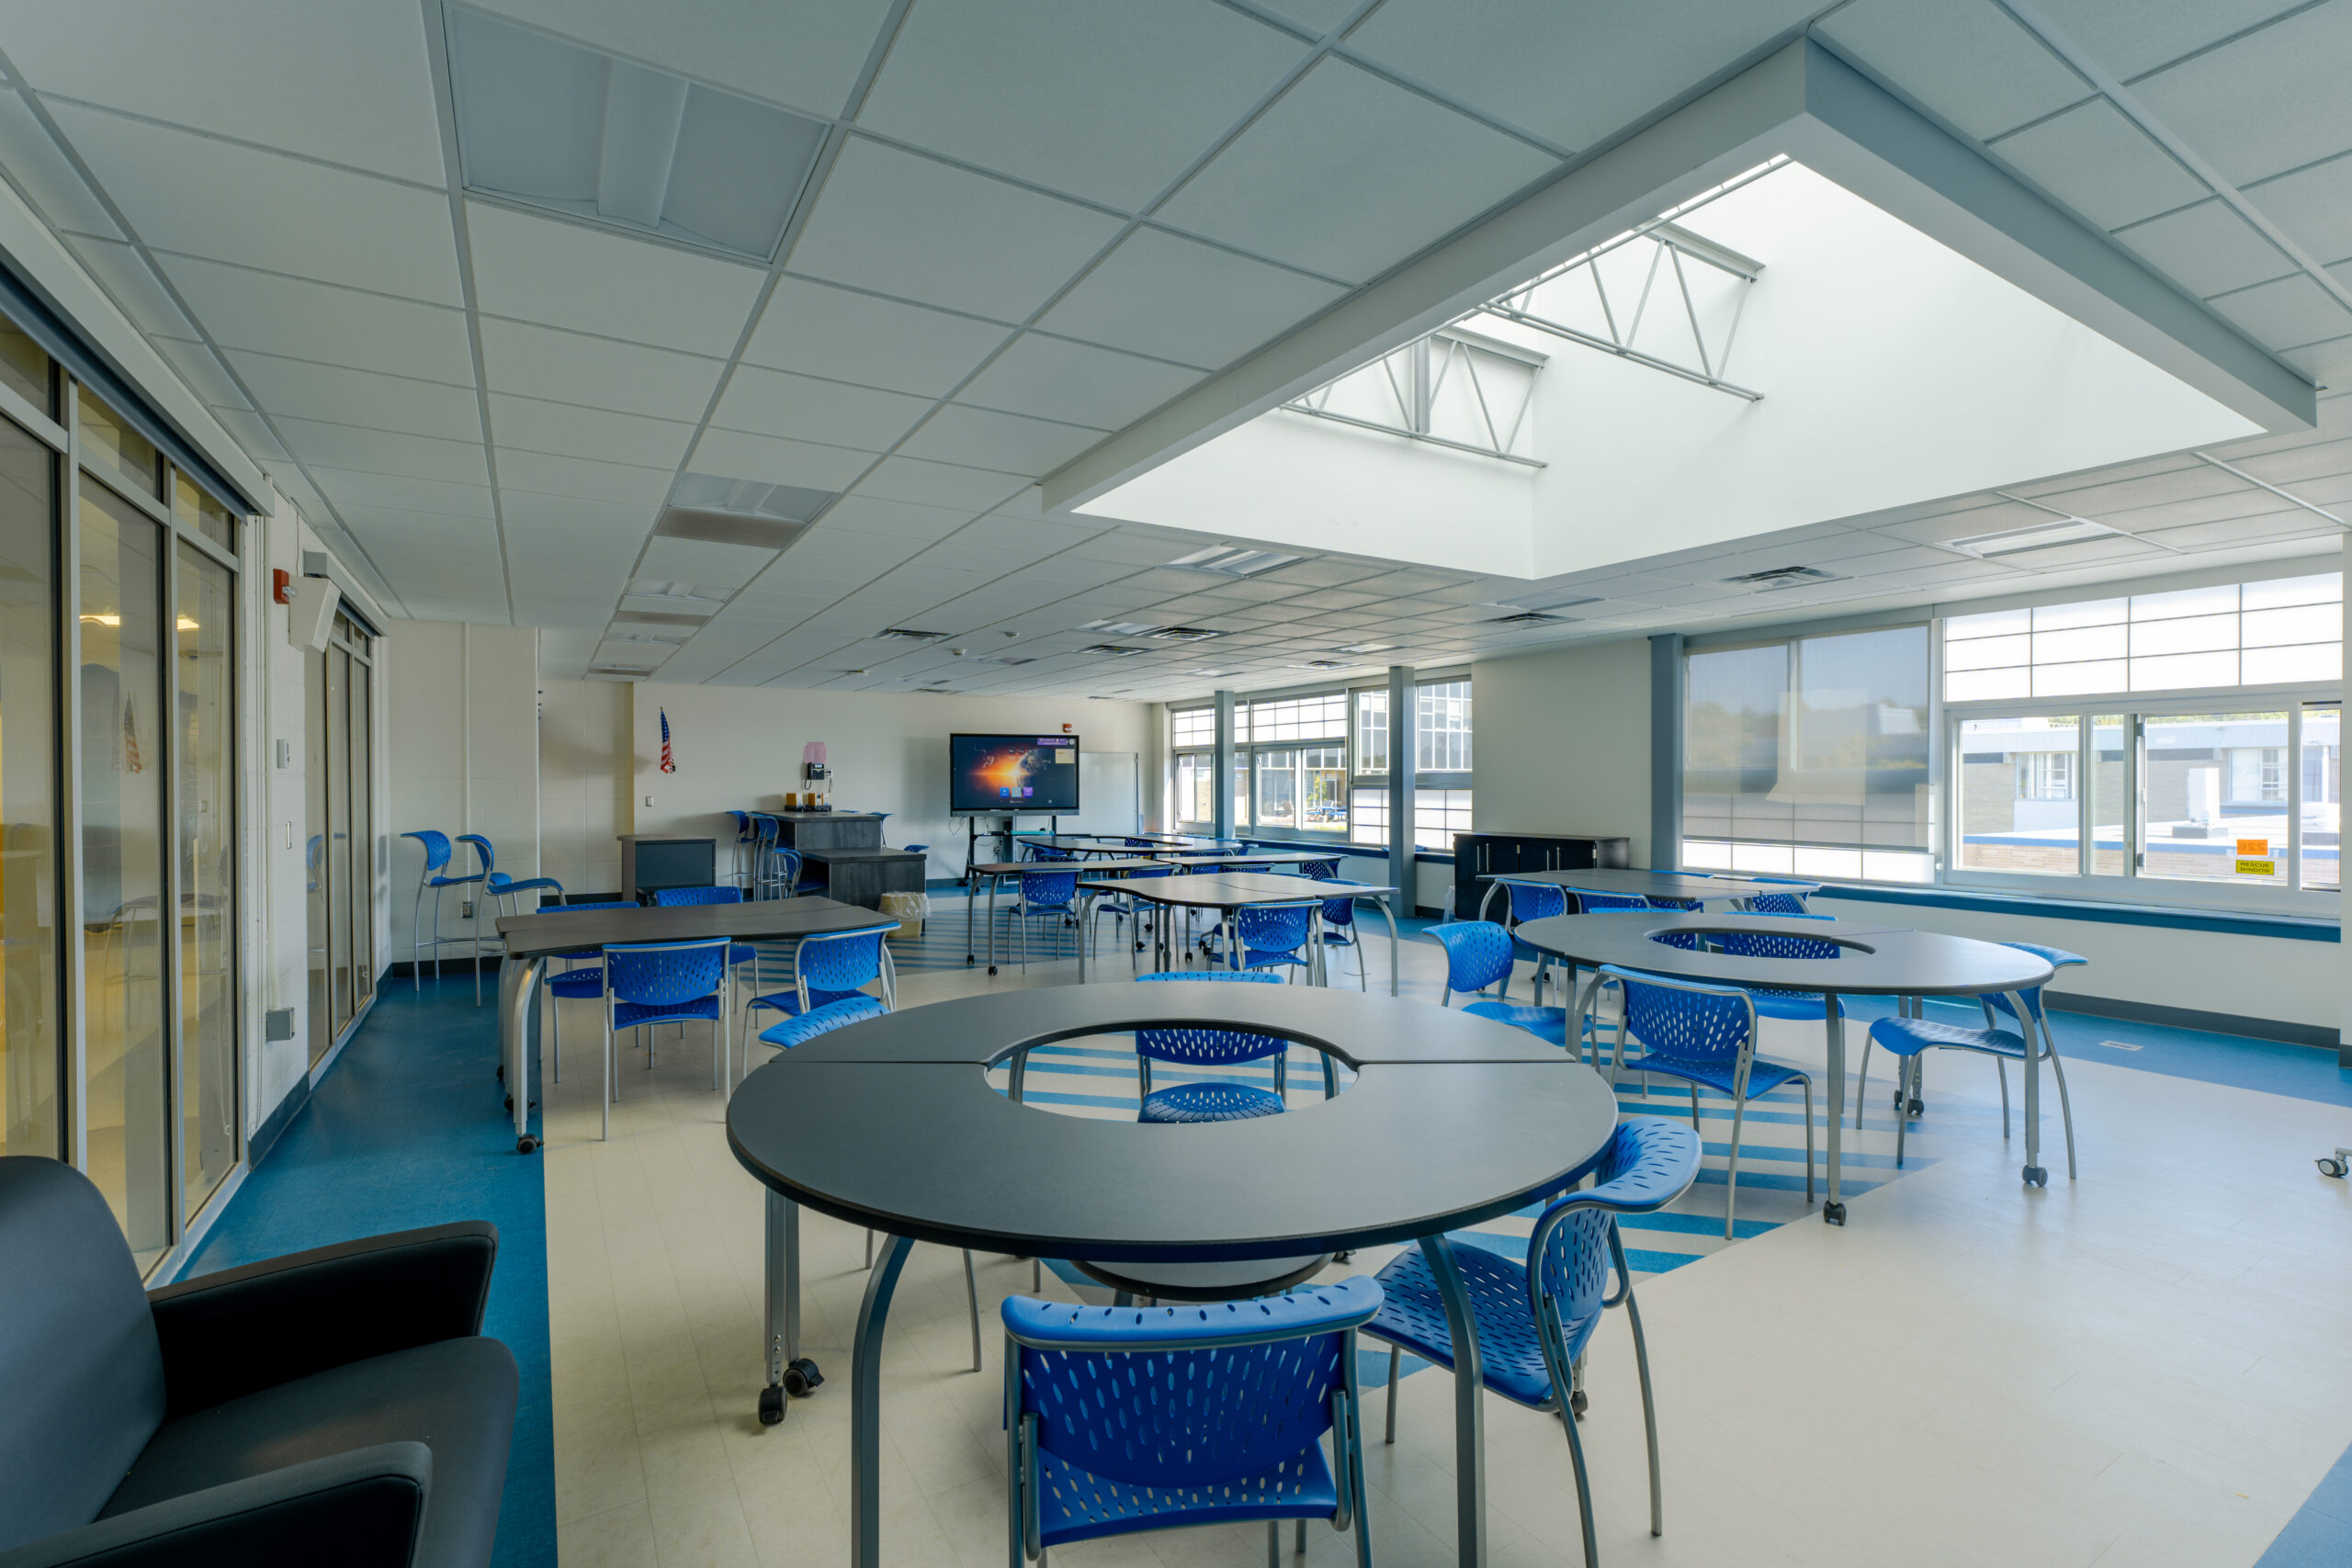 Classroom with round tables with blue chairs, left wall with windows, and skylight